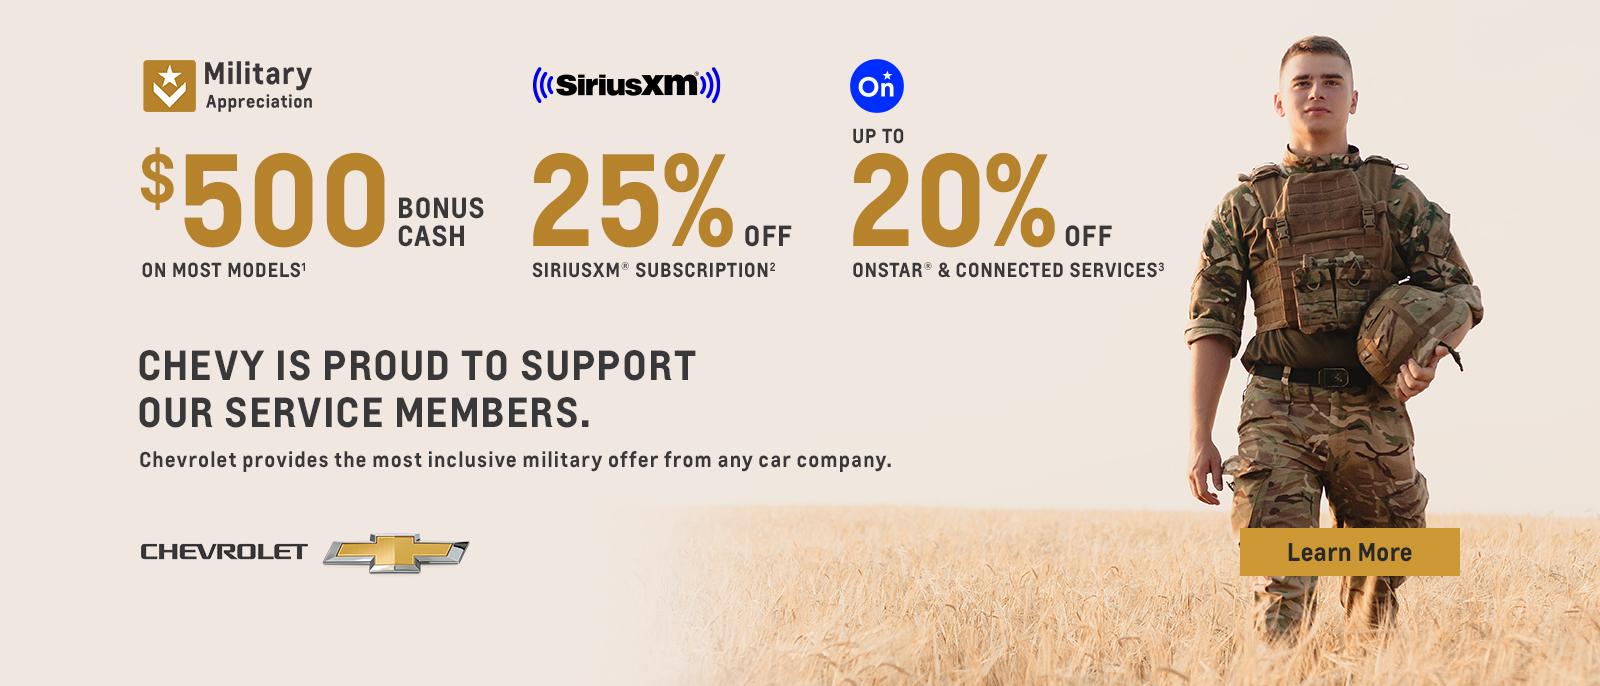 Chevy is proud to support our service members. Chevrolet provides the most inclusive military offer from any car company. $500 bonus cash on most models. 25% off SiriusXM subscription. Up to 20% off OnStar and Connected Services.